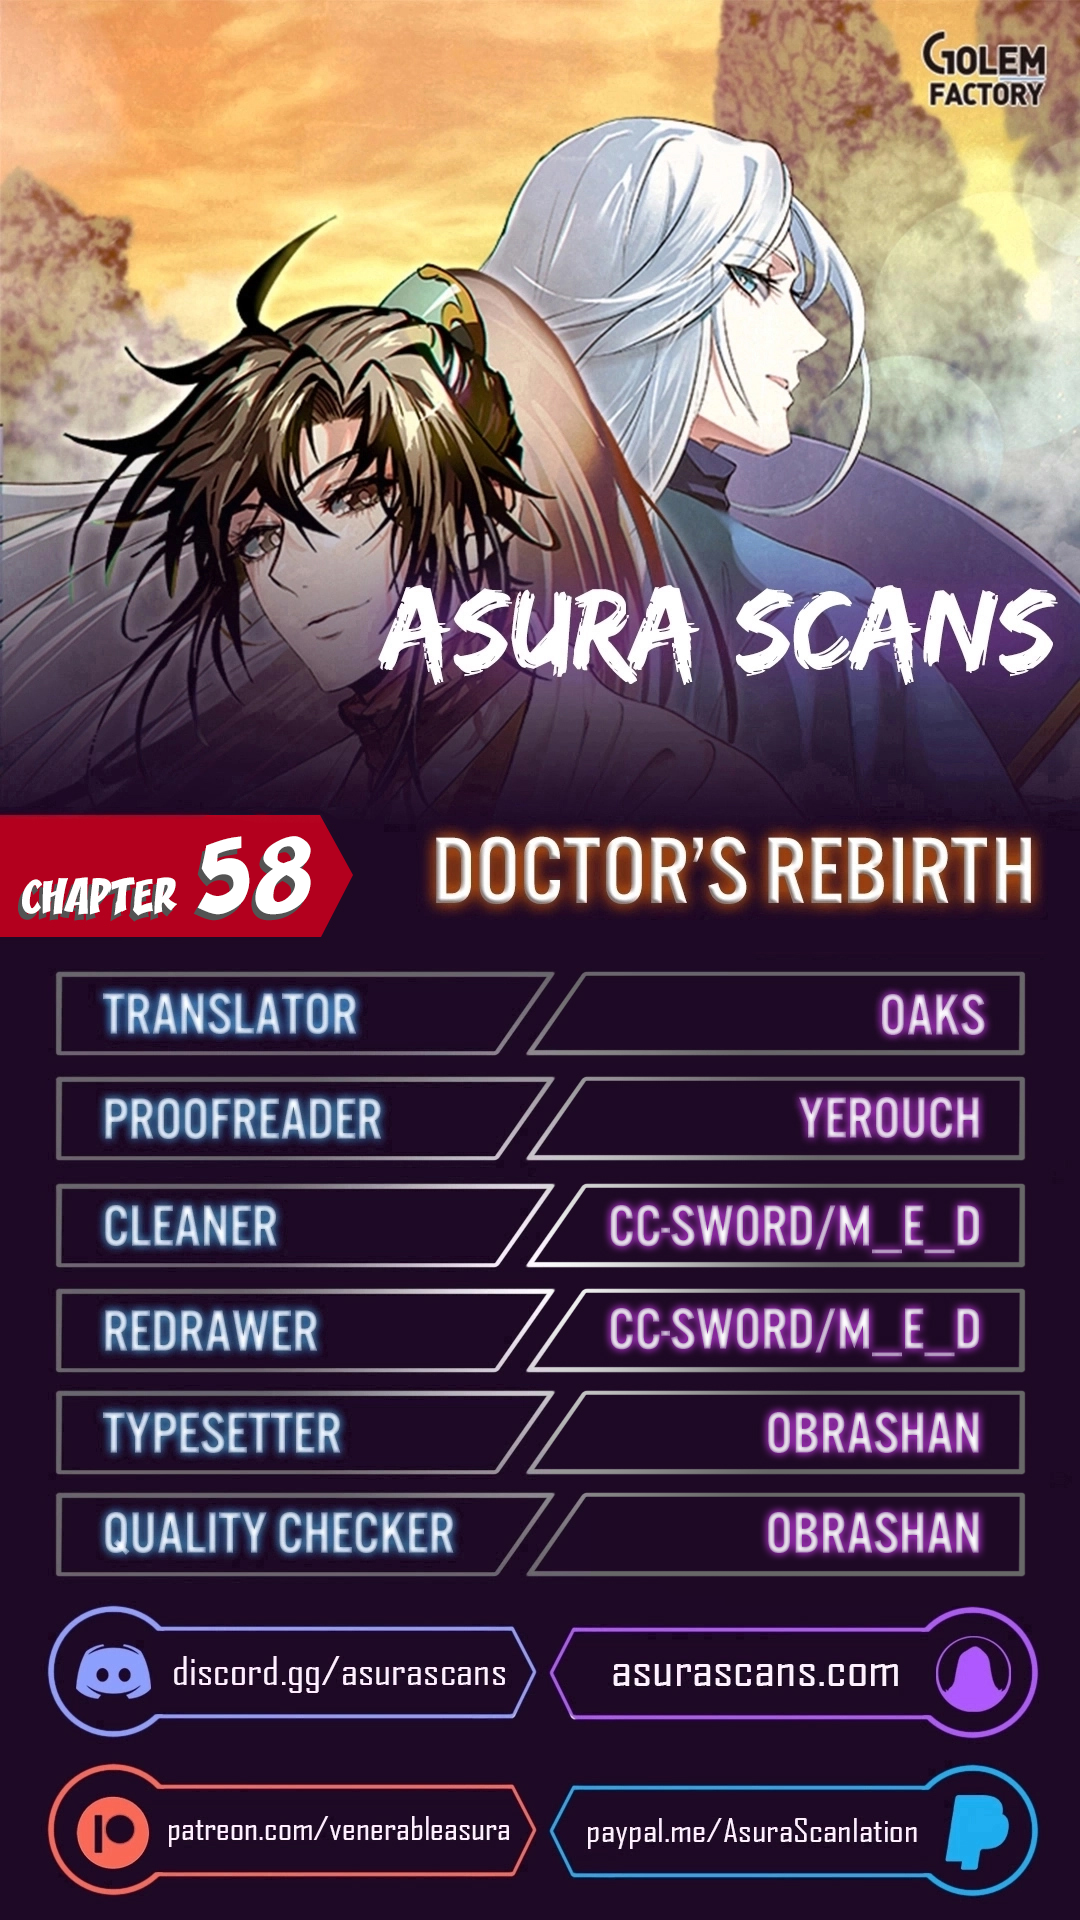 Doctor's Rebirth - Chapter 19075 - Page 1